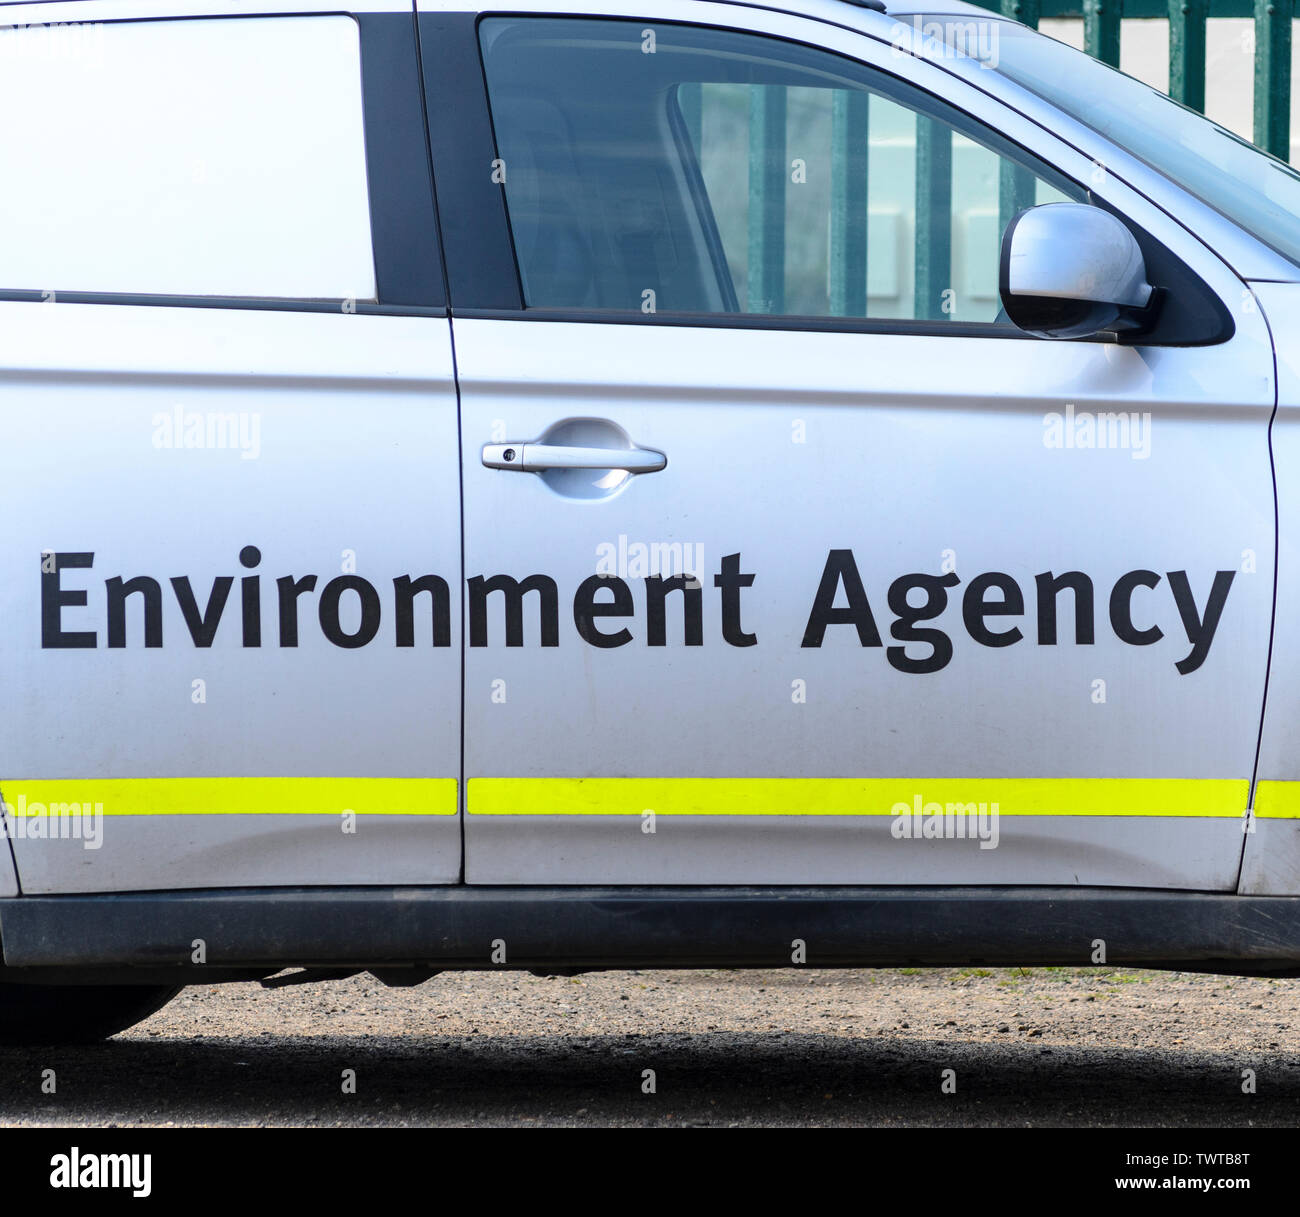 A environment agency car park by theinformation side of the road, UK Stock Photo